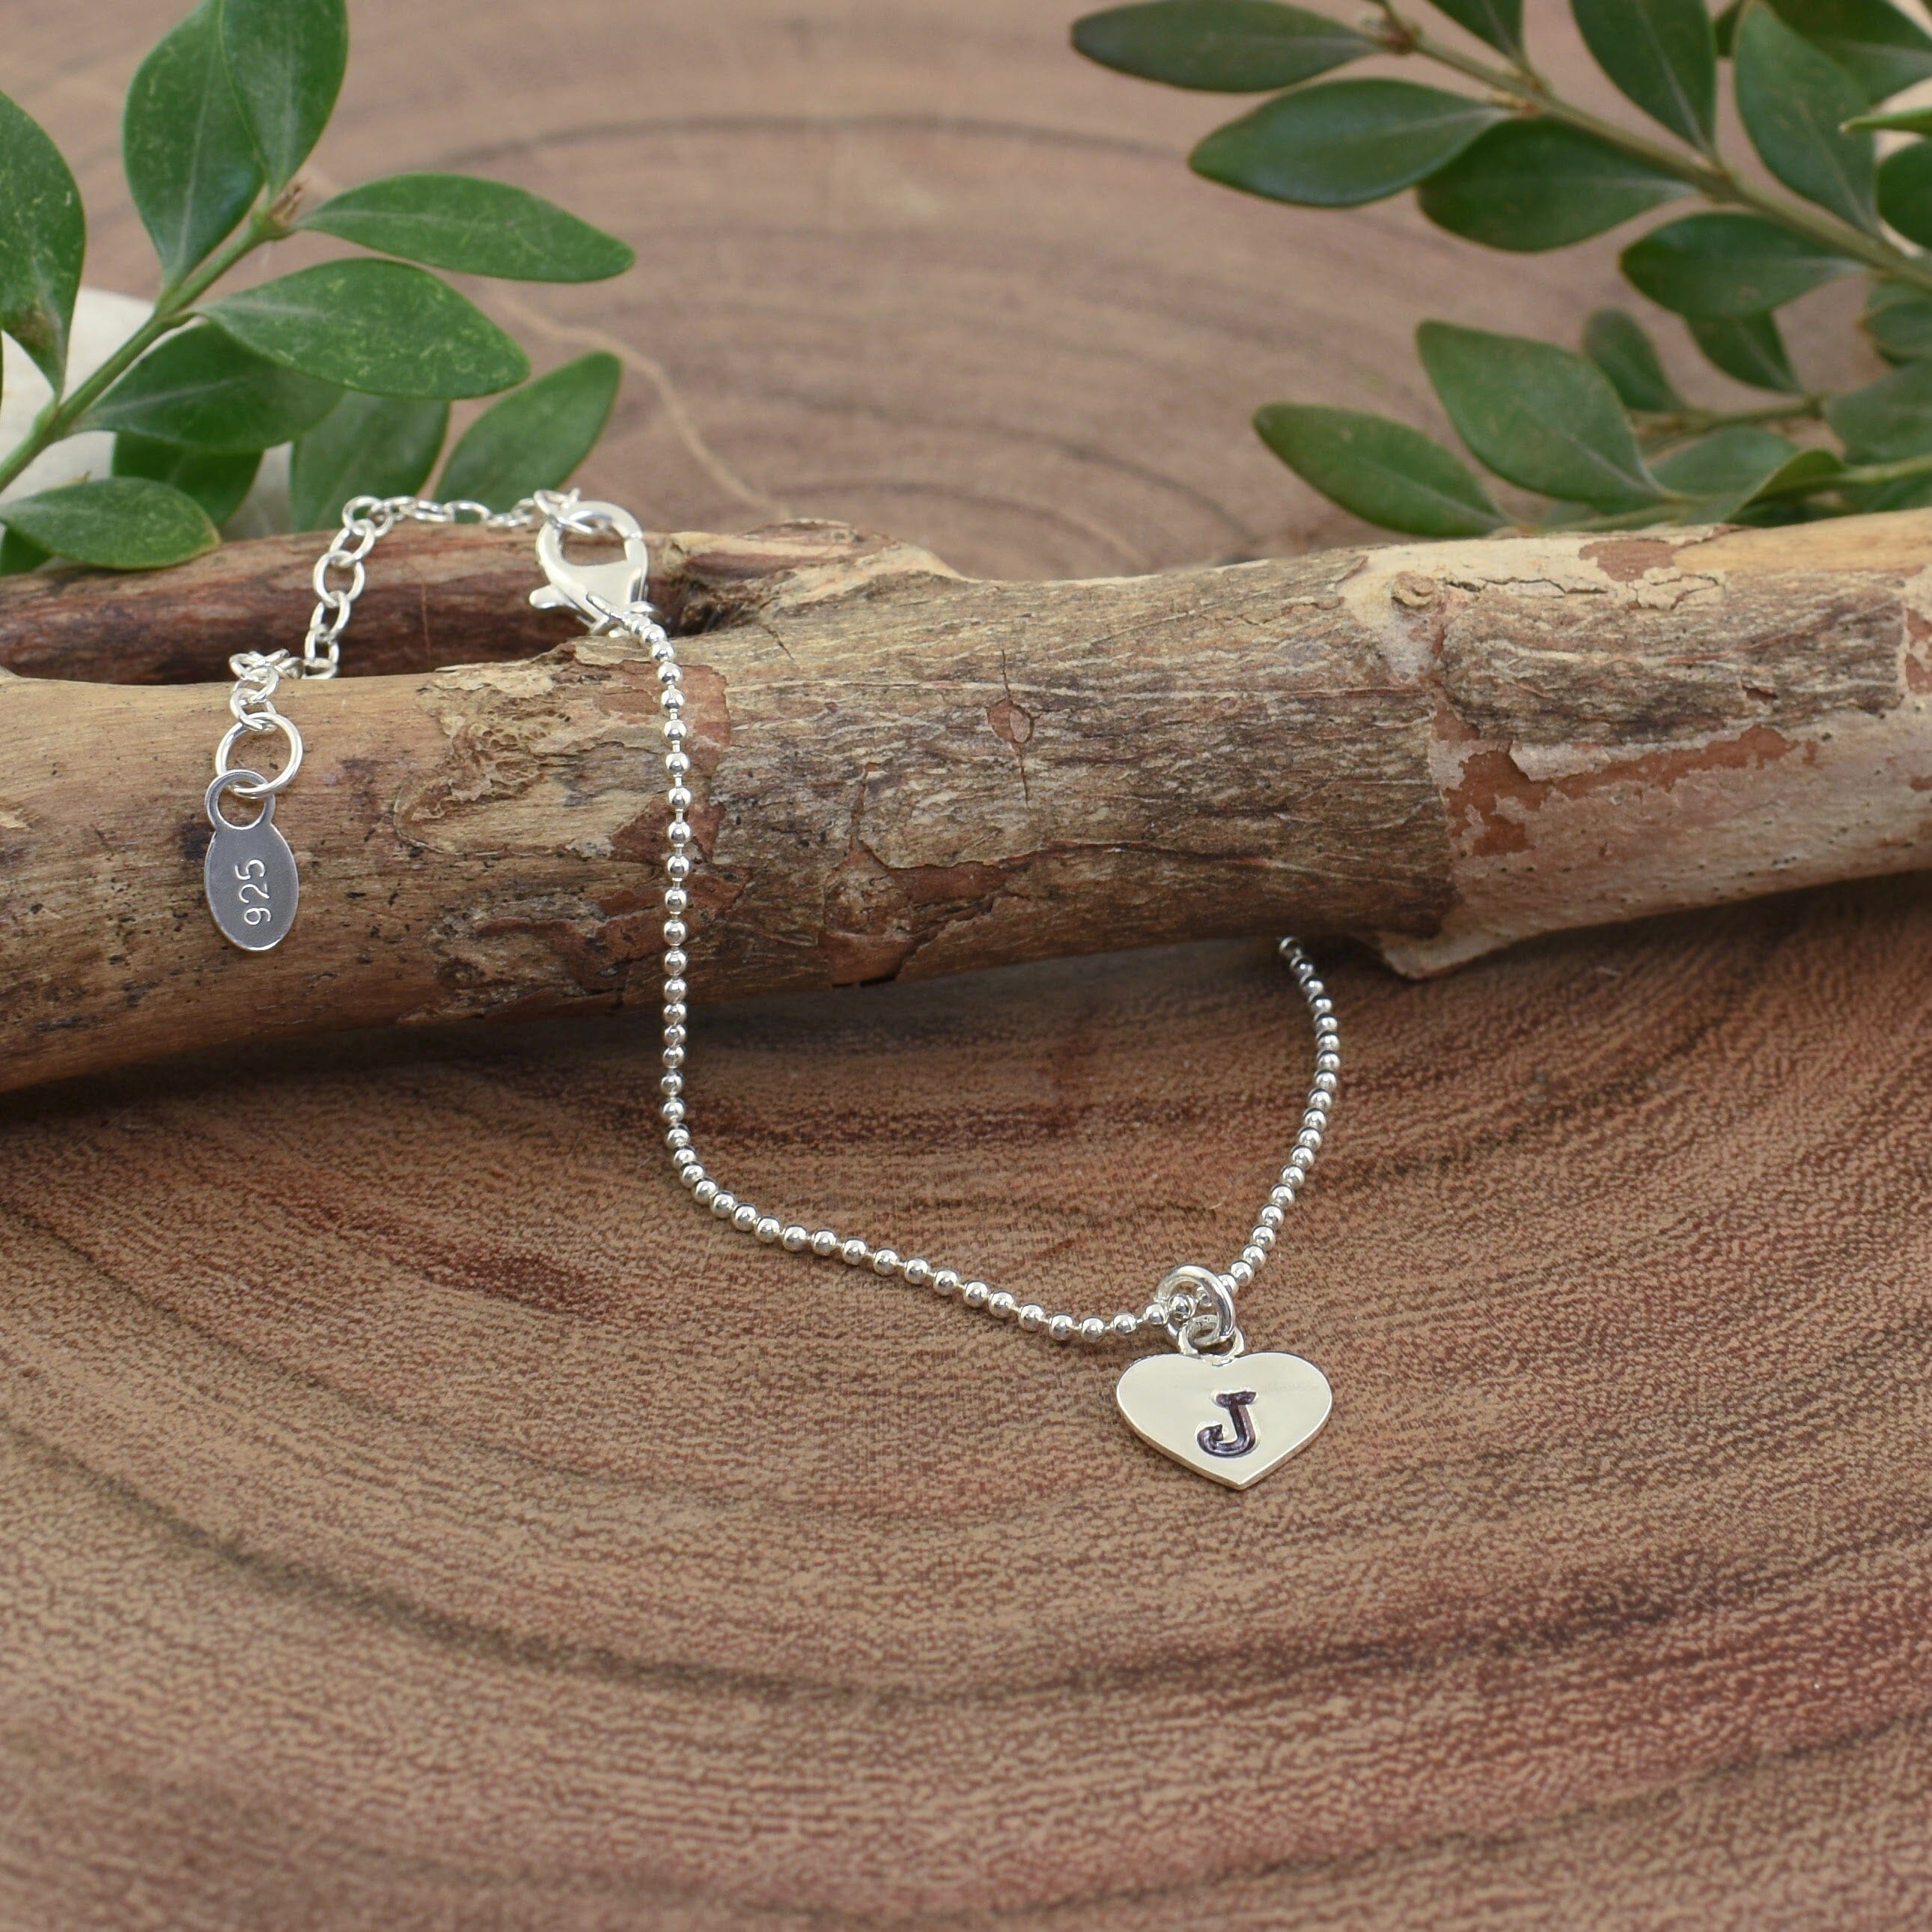 dainty .925 sterling silver adjustable bracelet with a personalized heart disk